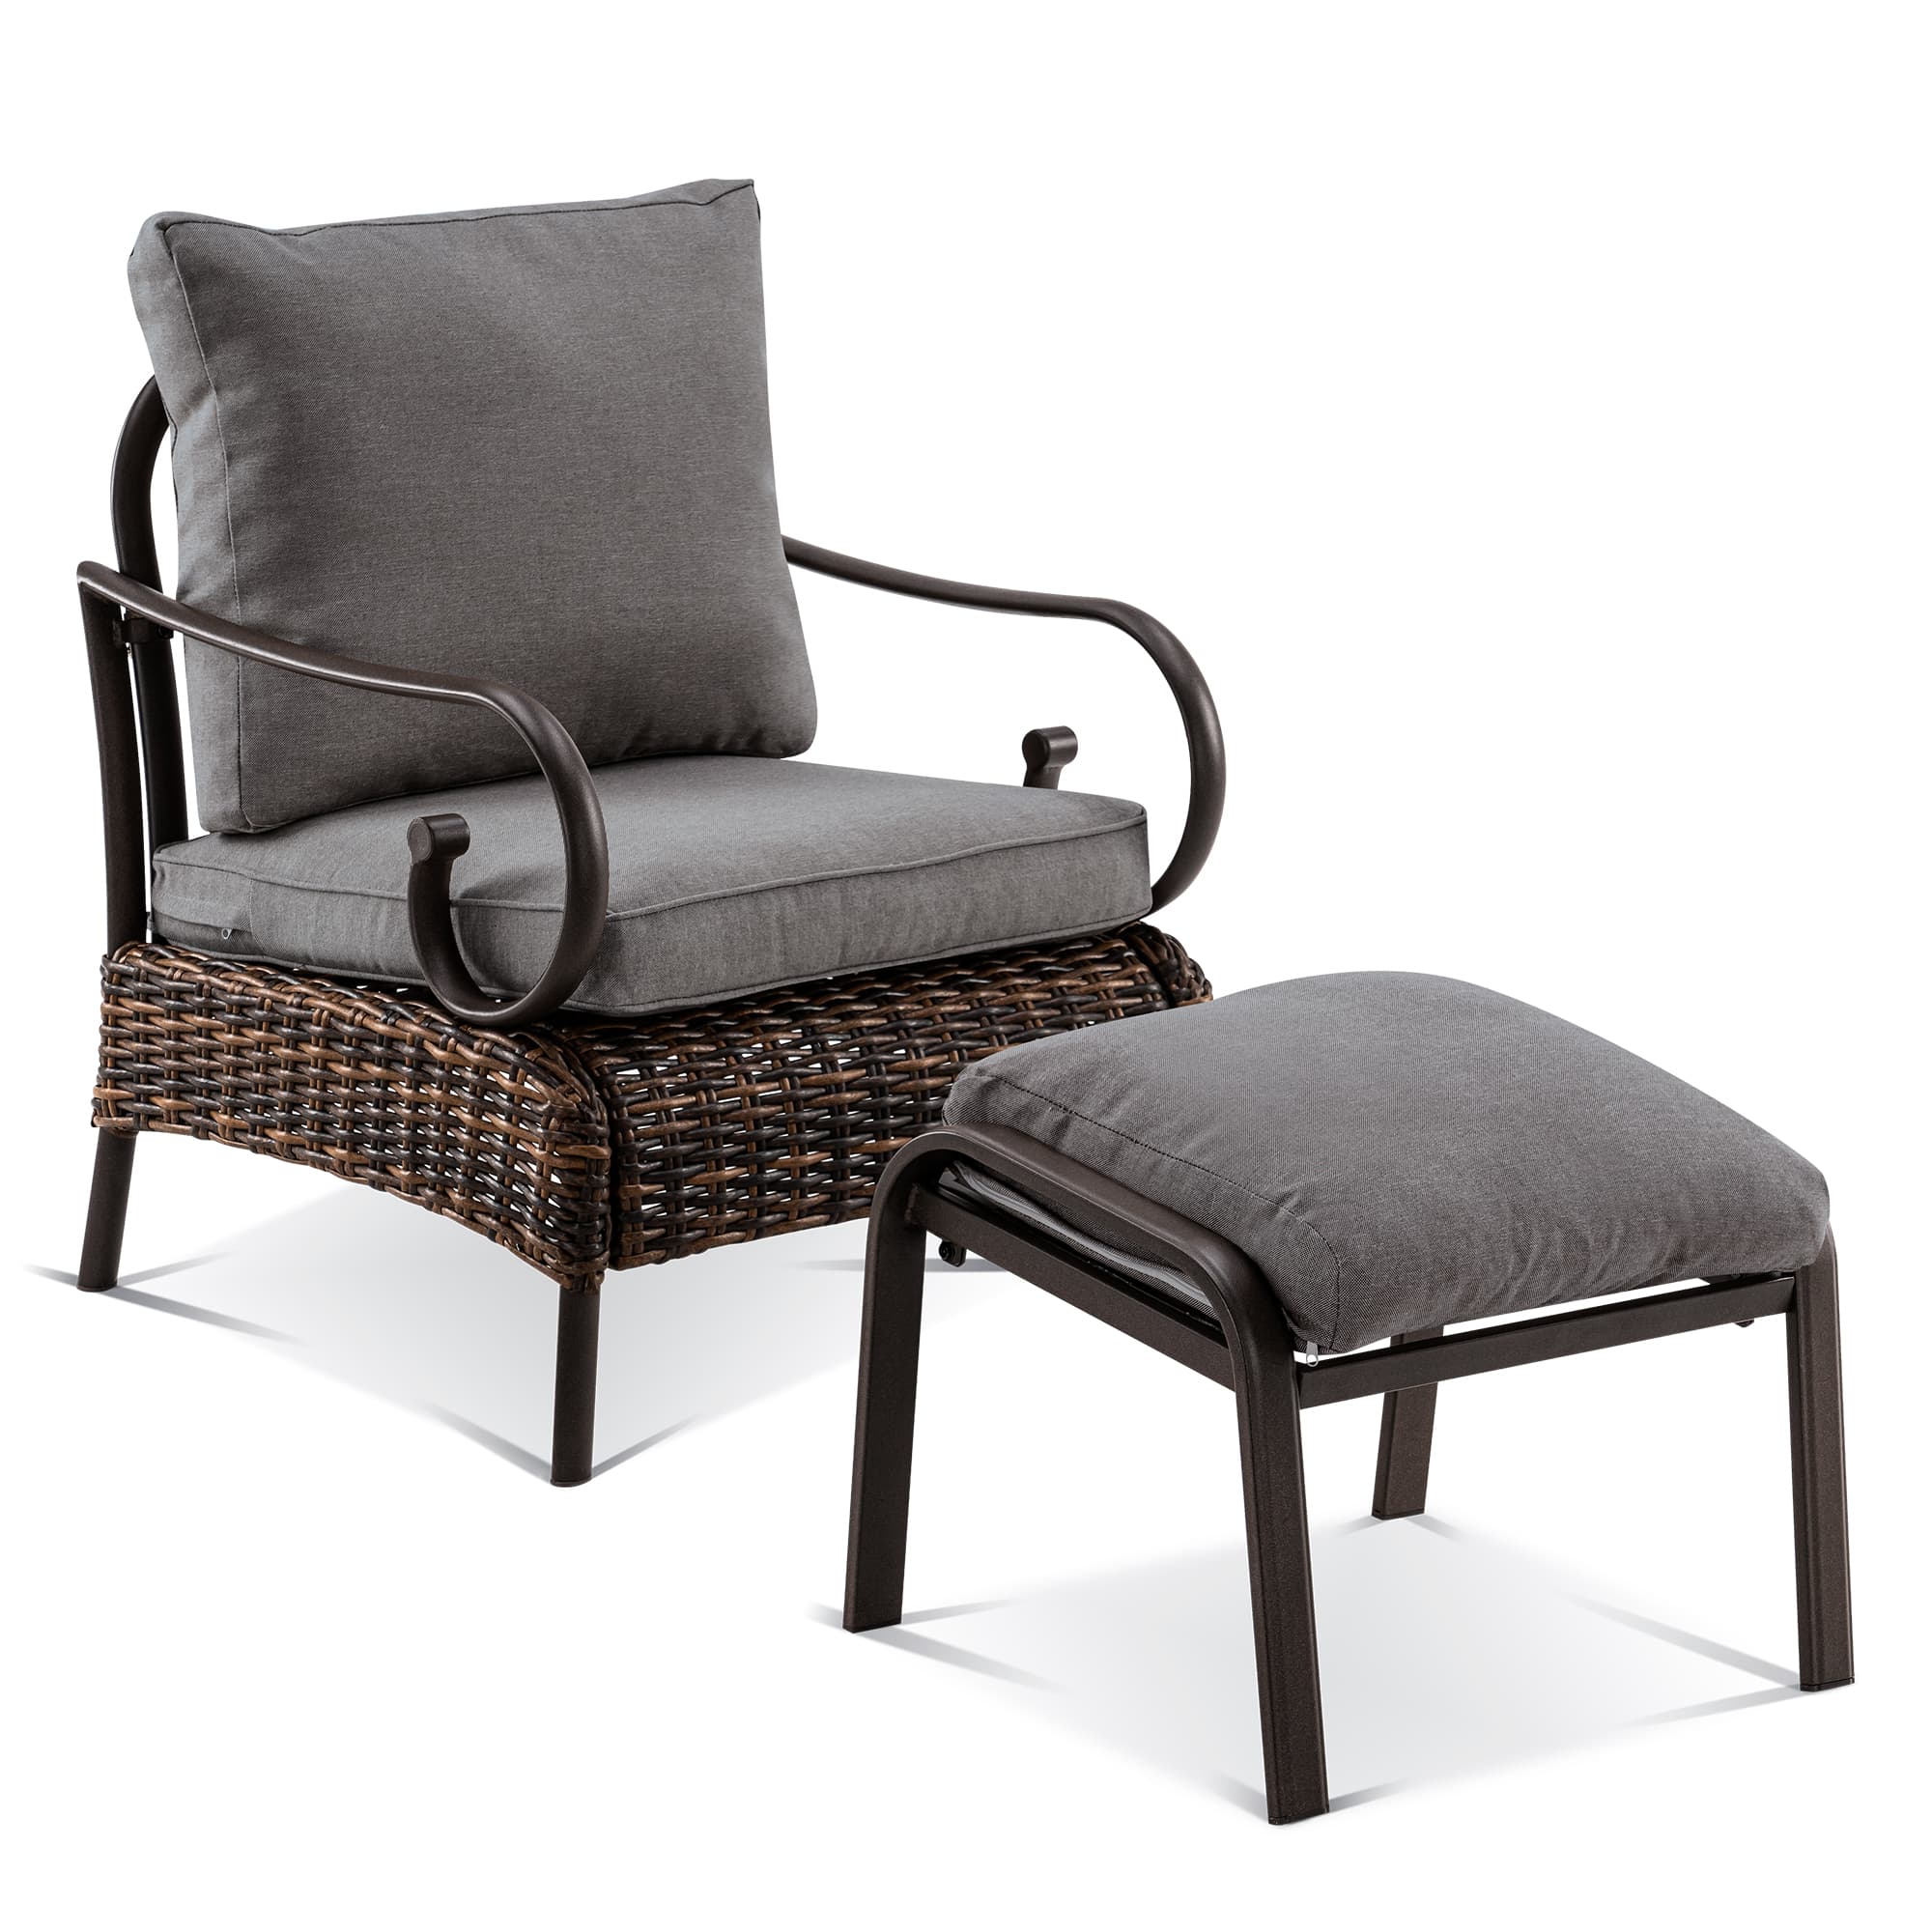 ivinta Outdoor Chair with Ottoman, Patio Wicker Chair with Fabric Cushions, 2 Piece PE Rattan Chair for Garden